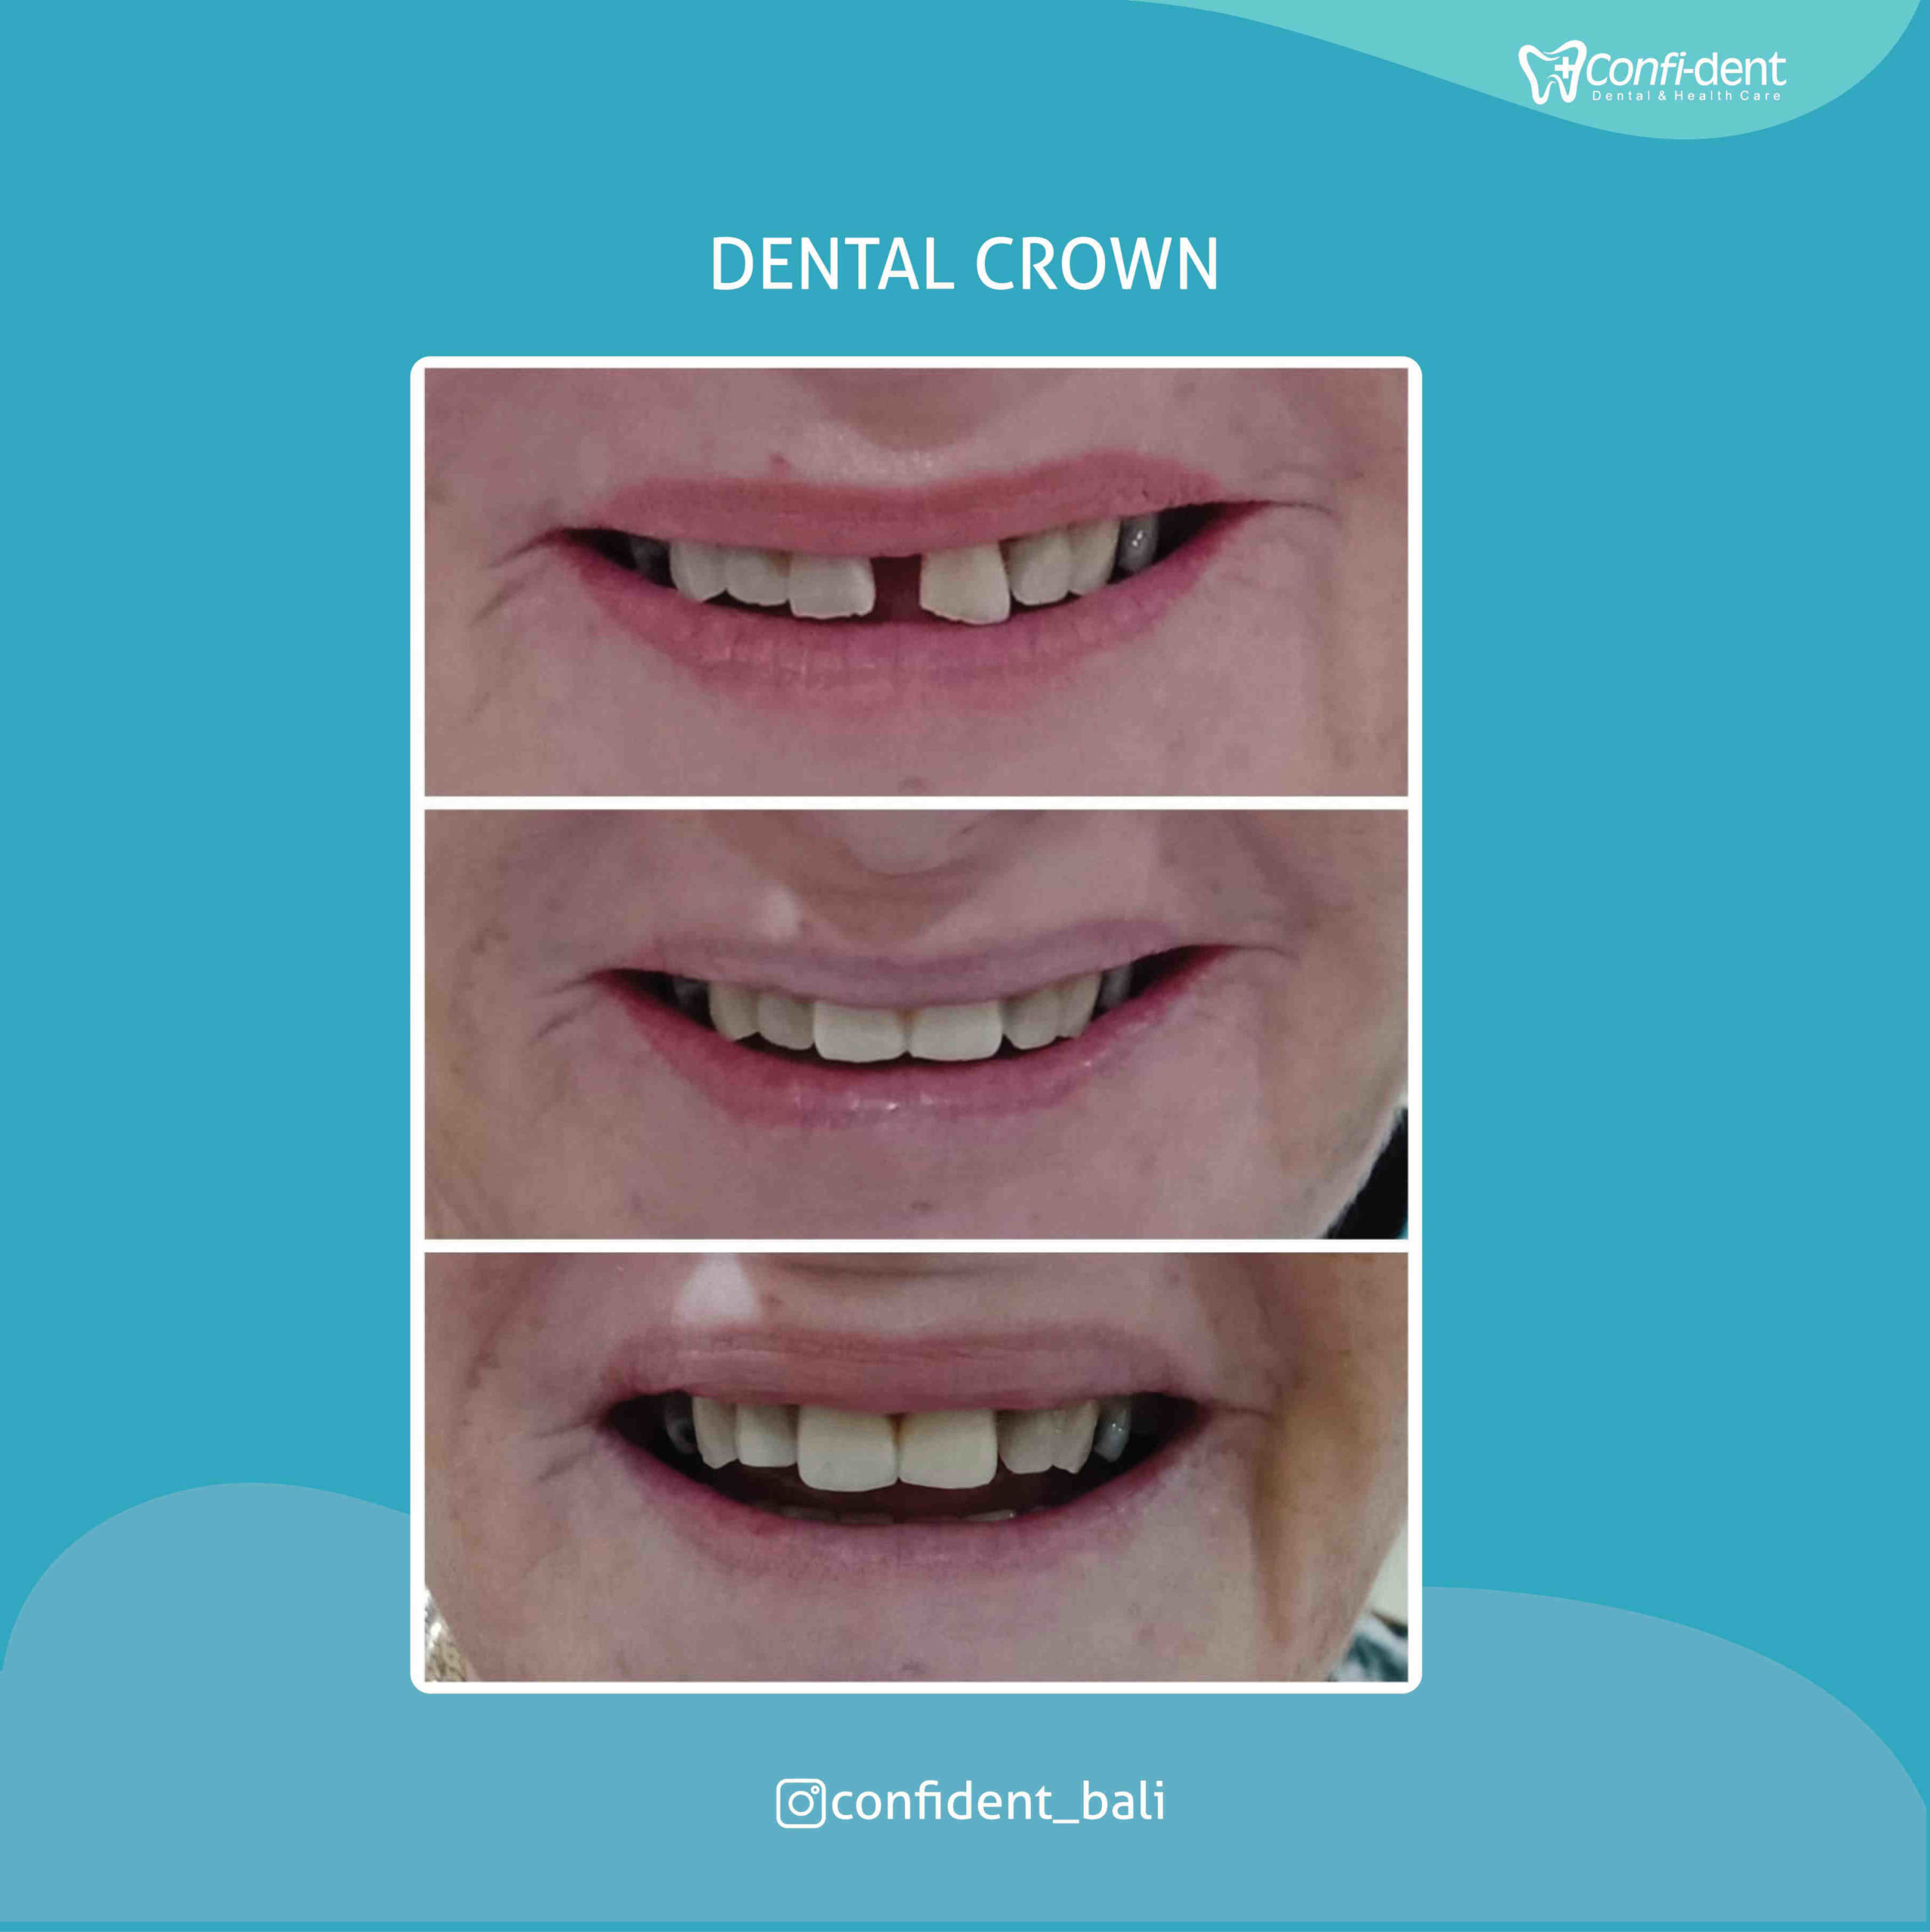 Can a tooth under a crown get infected?